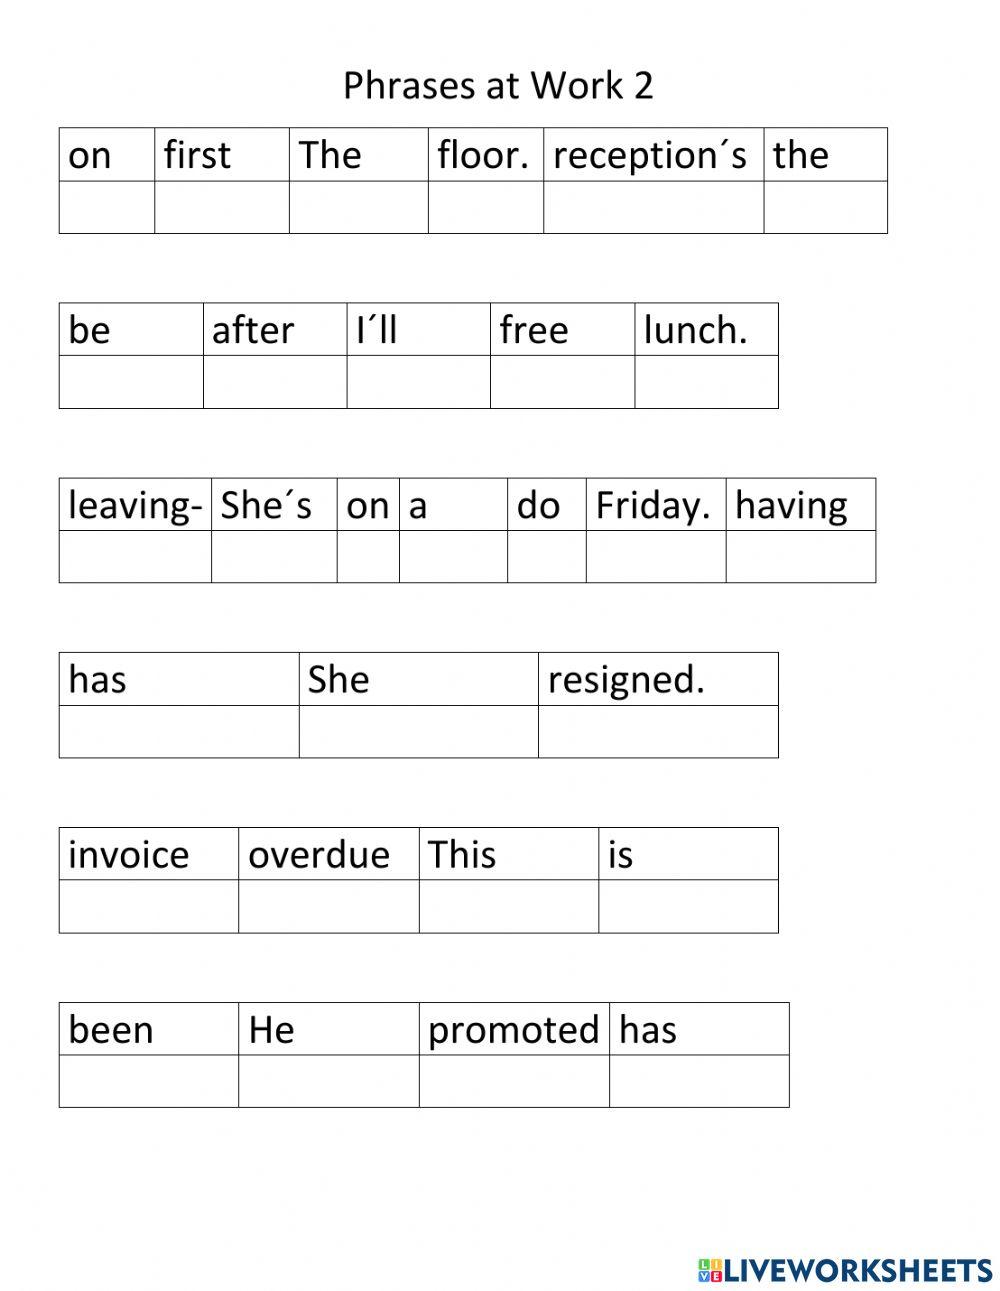 Phrases at Work 2